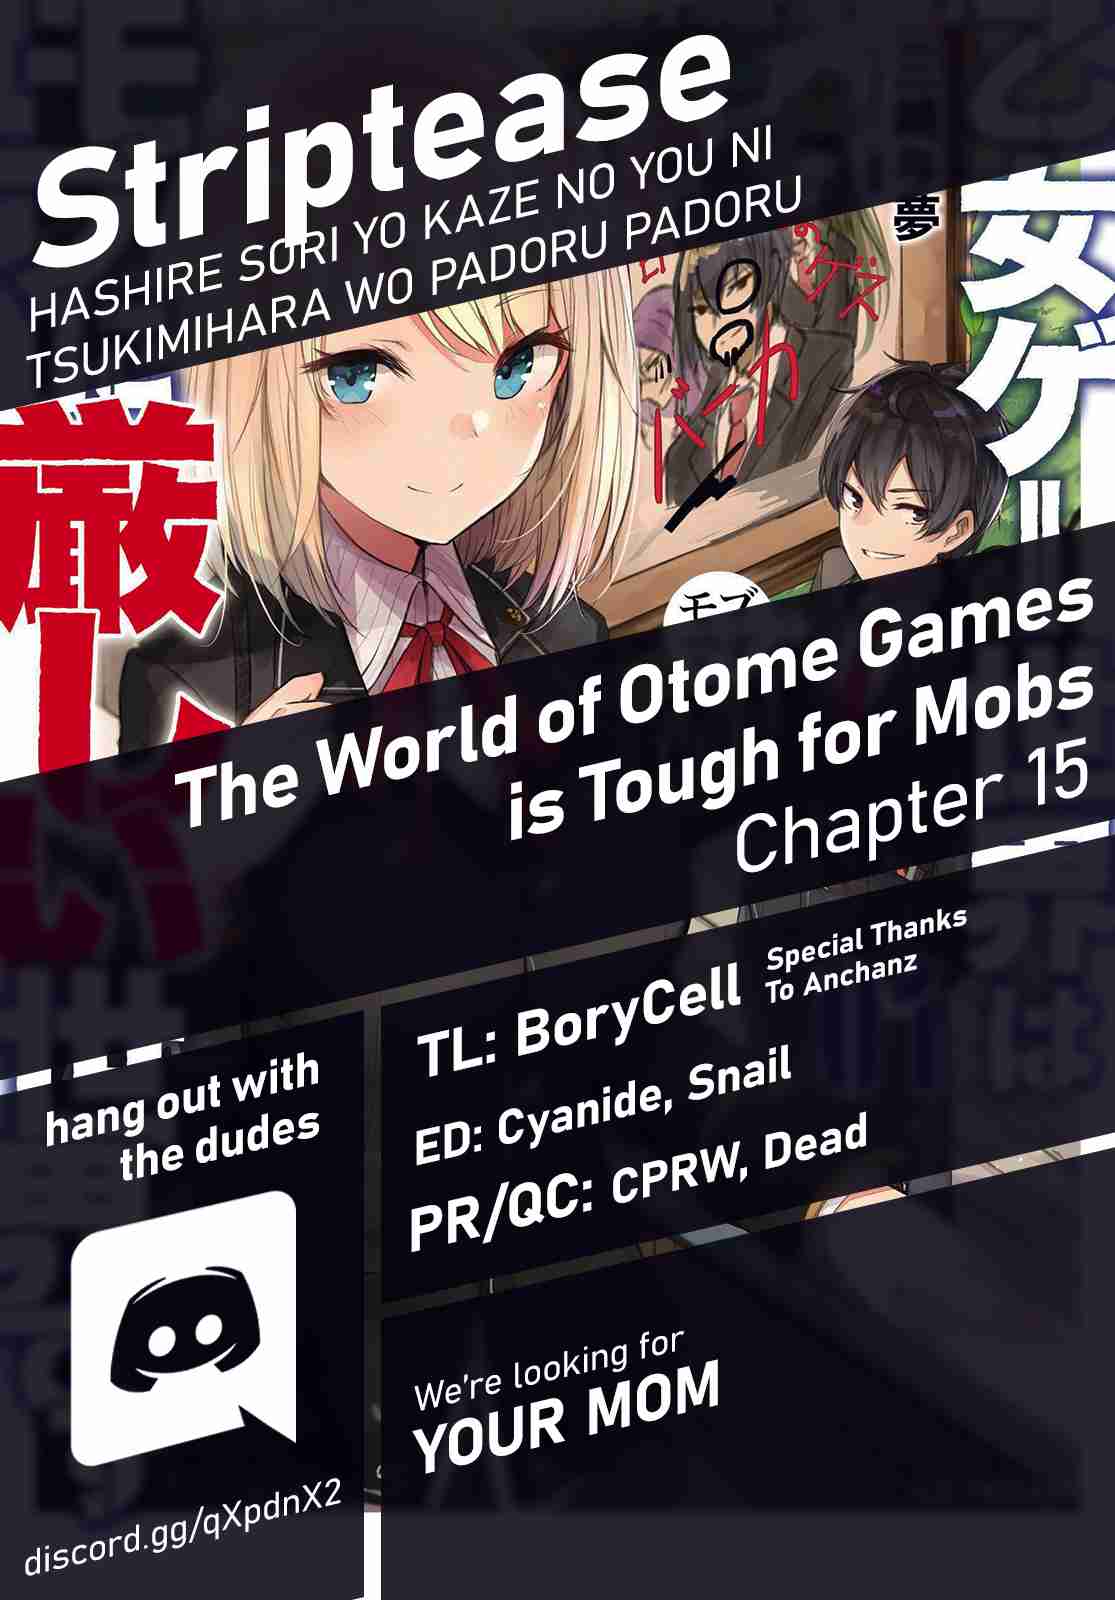 The World of Otome Games is Tough for Mobs Ch. 15 A Woman’s Friendship is But a Fantasy